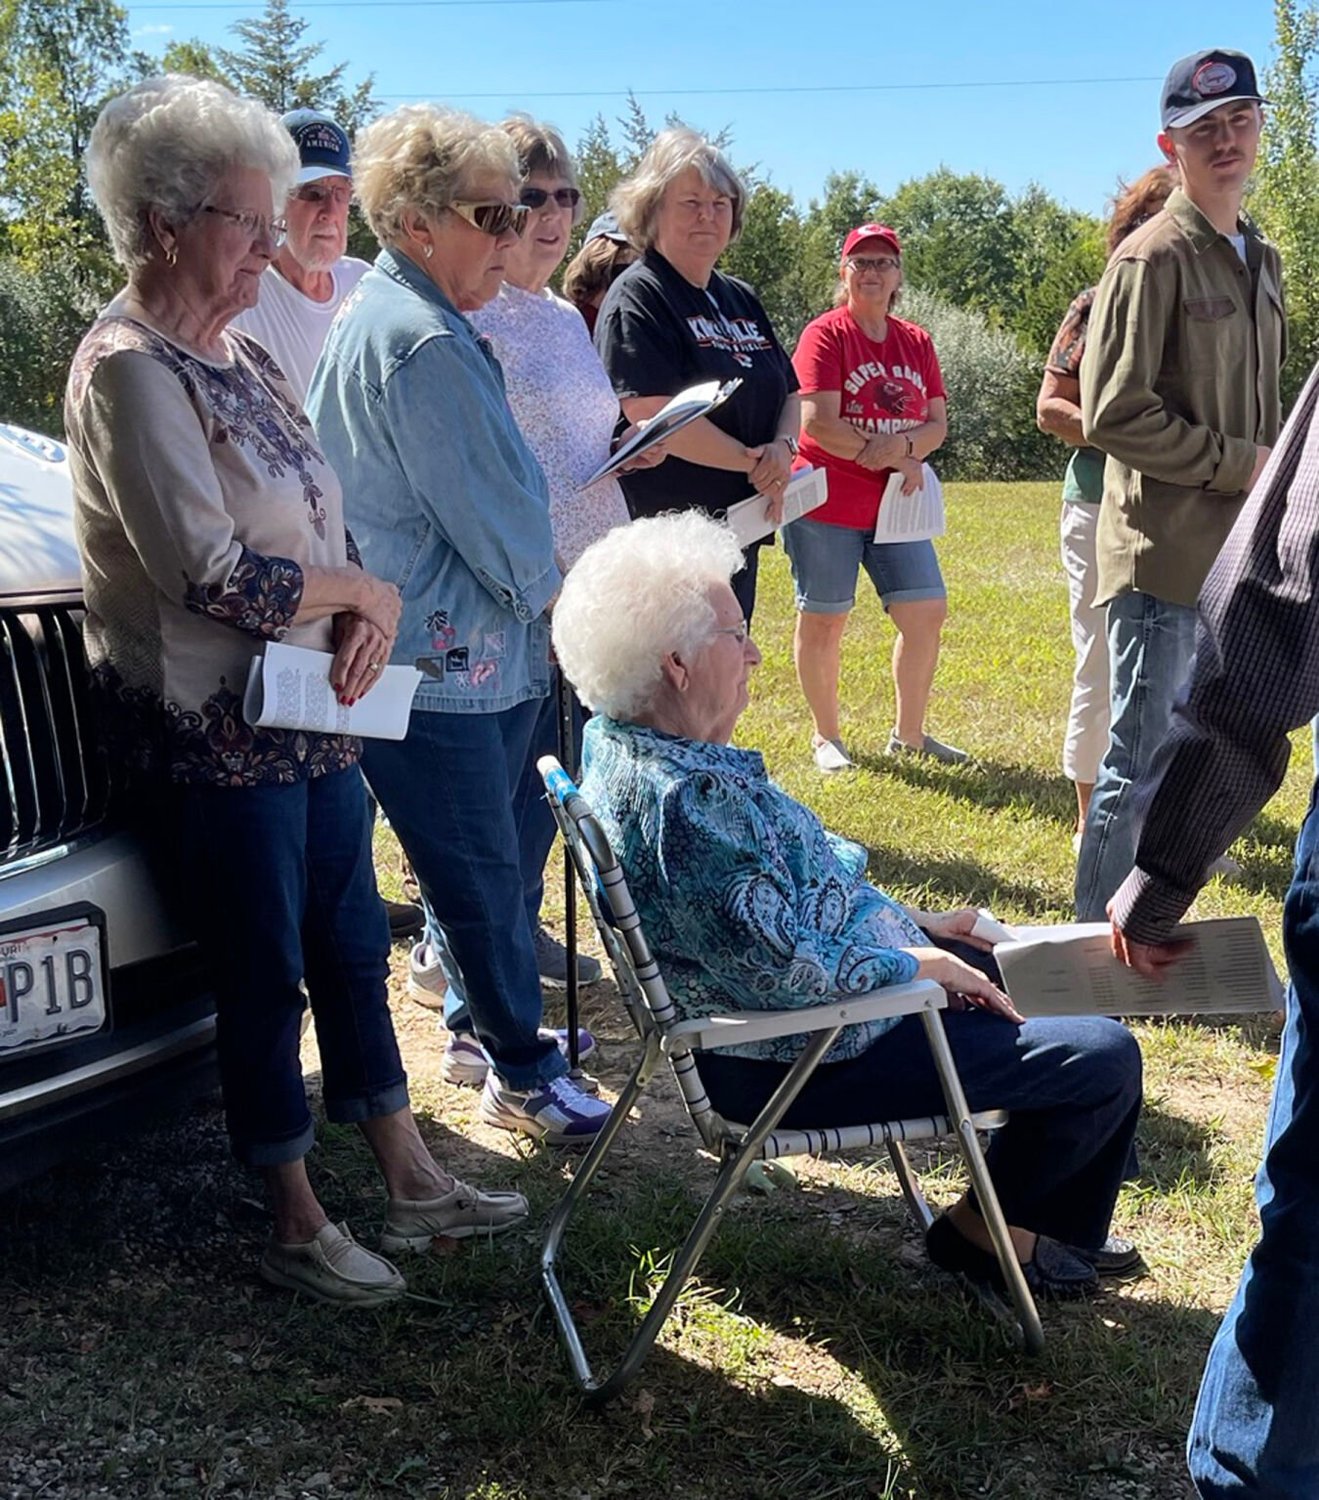 Joanne Pearce (seated) and behind her, holding paper, Pat Brawner, both of whom attended Salisbury School. The women shared stories of the school and events that took place in the area where they grew up.